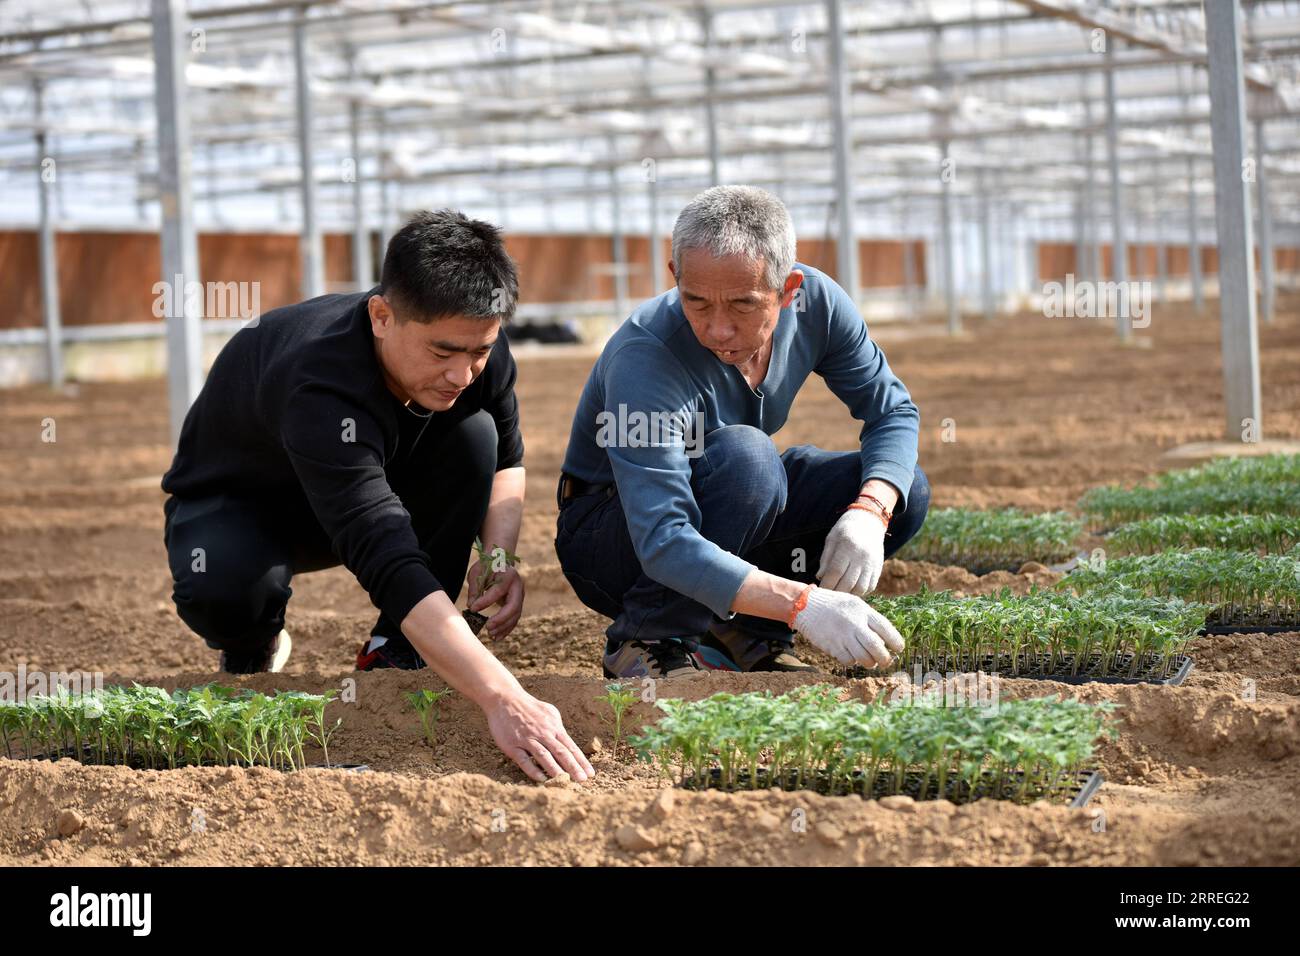 220227 -- SHIJIAZHUANG, Feb. 27, 2022 -- Song Lianfeng L plants vegetable seedlings with a worker at a greenhouse in Gaogongzhuang Township of Xingtai, north China s Hebei Province, Feb. 27, 2022. Song Lianfeng, 39, is a native of Gaogongzhuang. Local farmers mostly grew greenhouse vegetables, but the costs for purchasing seedlings were high. In 2011, Song saw the market demand and decided to engage in vegetable seedling business. In order to master the techniques of vegetable seedling raising and planting, Song spent years studying and exploring. With the help of technicians, he was able to s Stock Photo